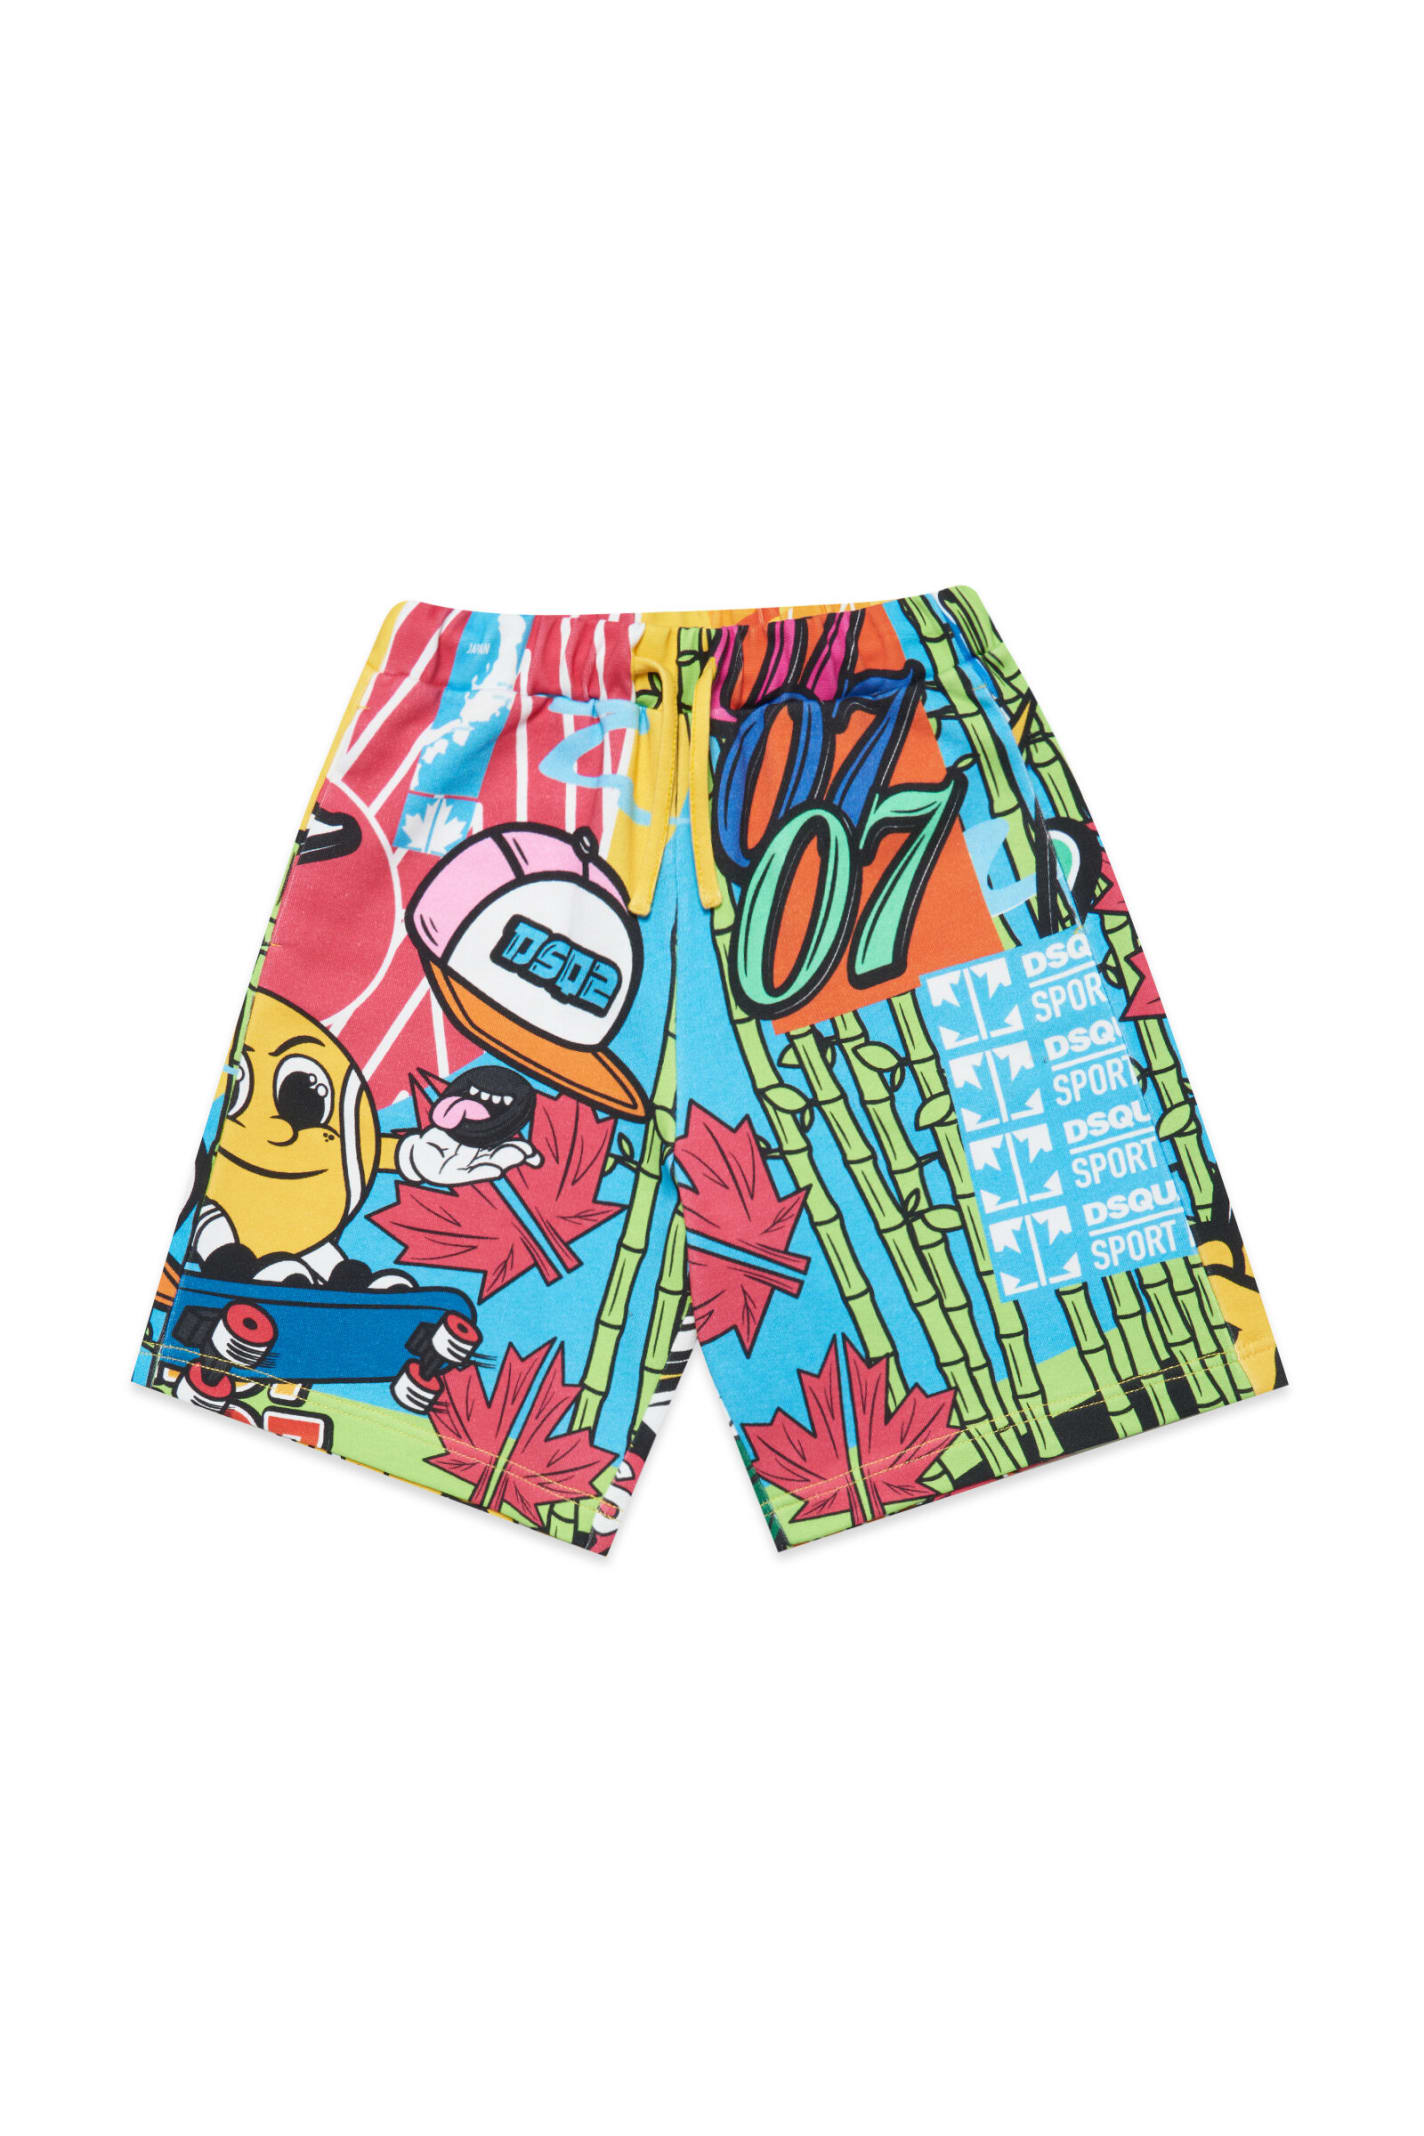 Dsquared2 D2p558u Over Shorts Dsquared Cotton Shorts With Allover Print Shibuya Sport Edtn 07